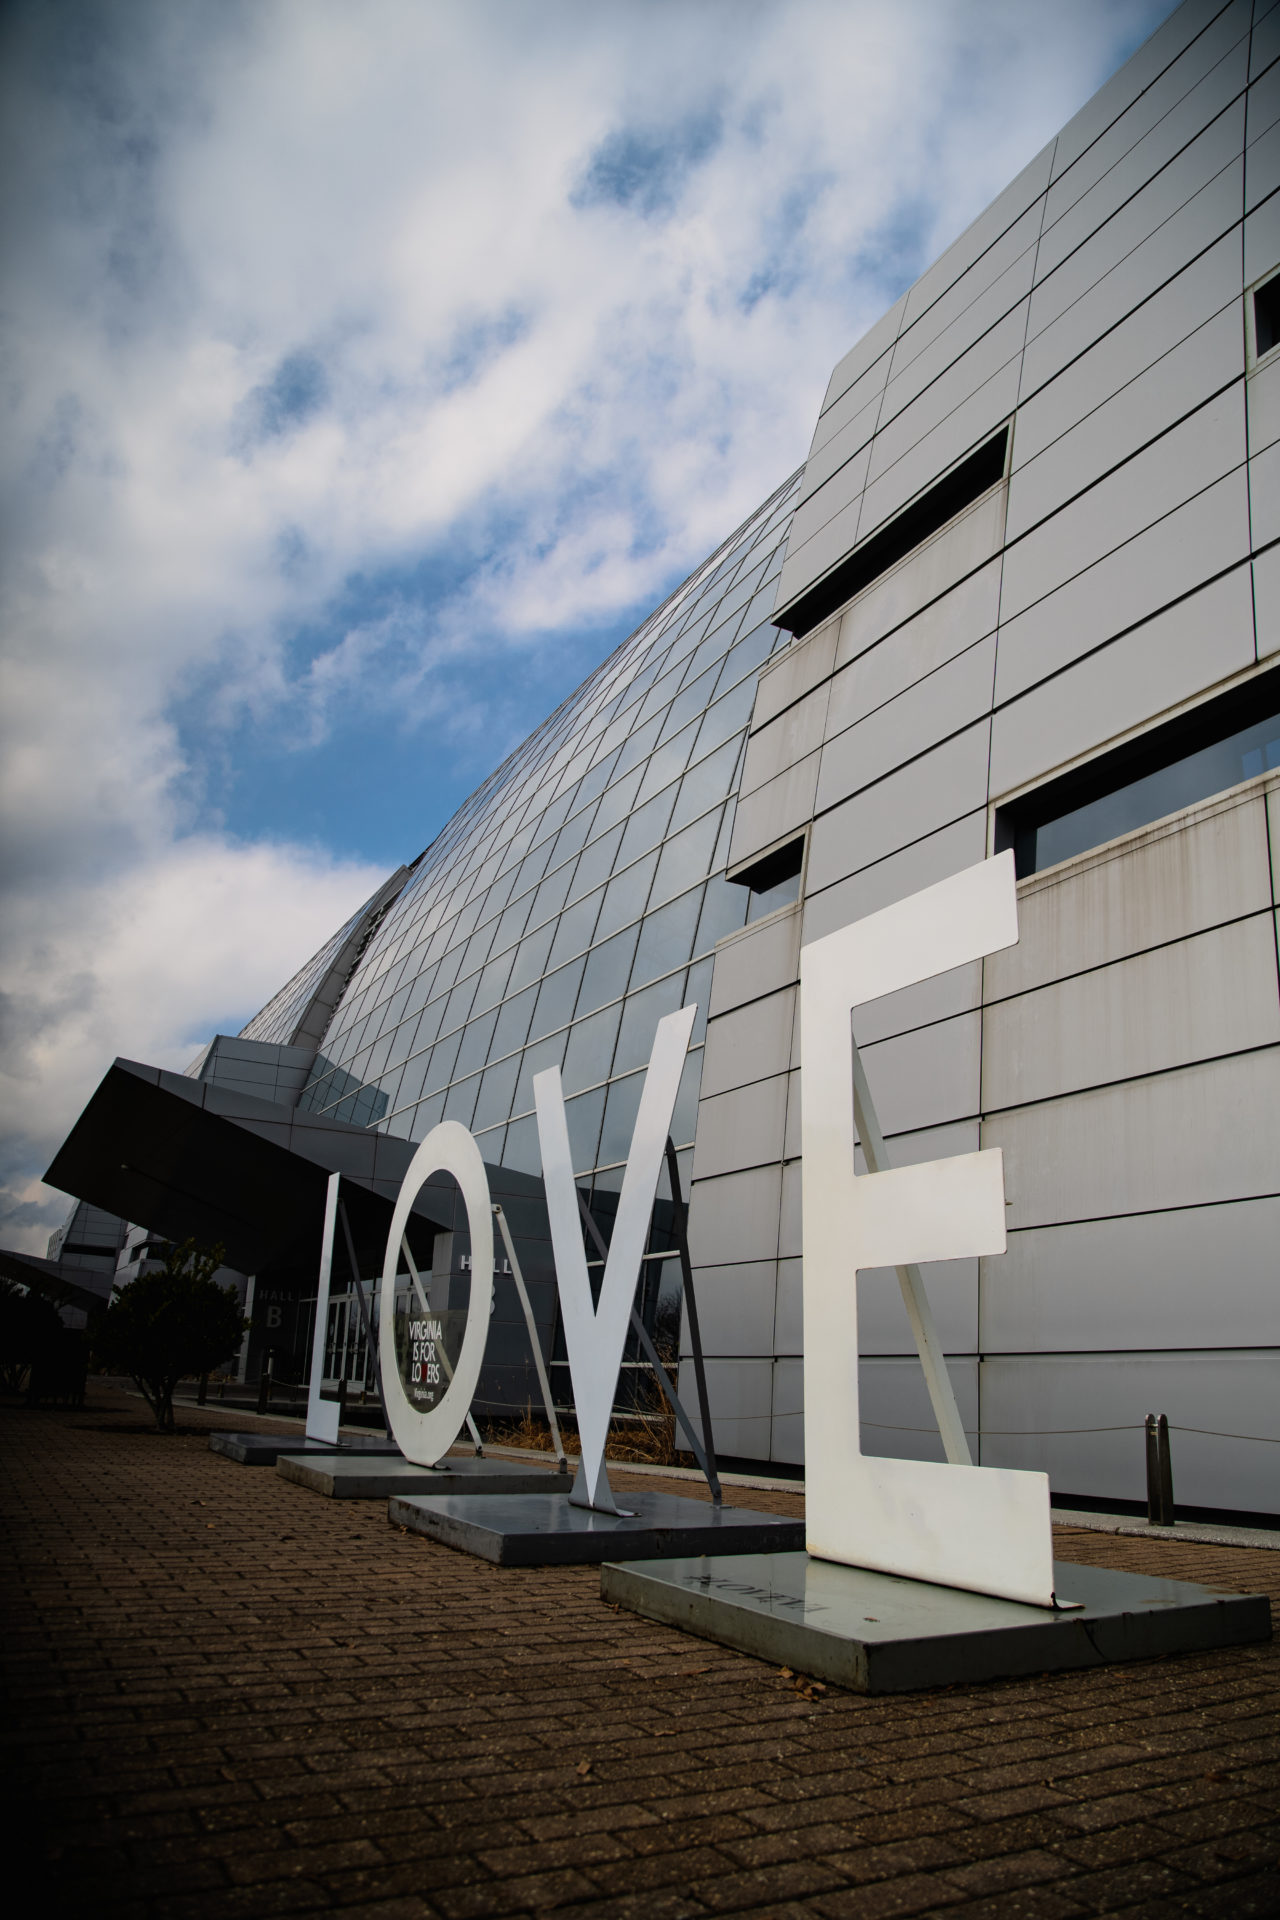 Event photography of a large 'LOVE' sign with a modern building in the background.